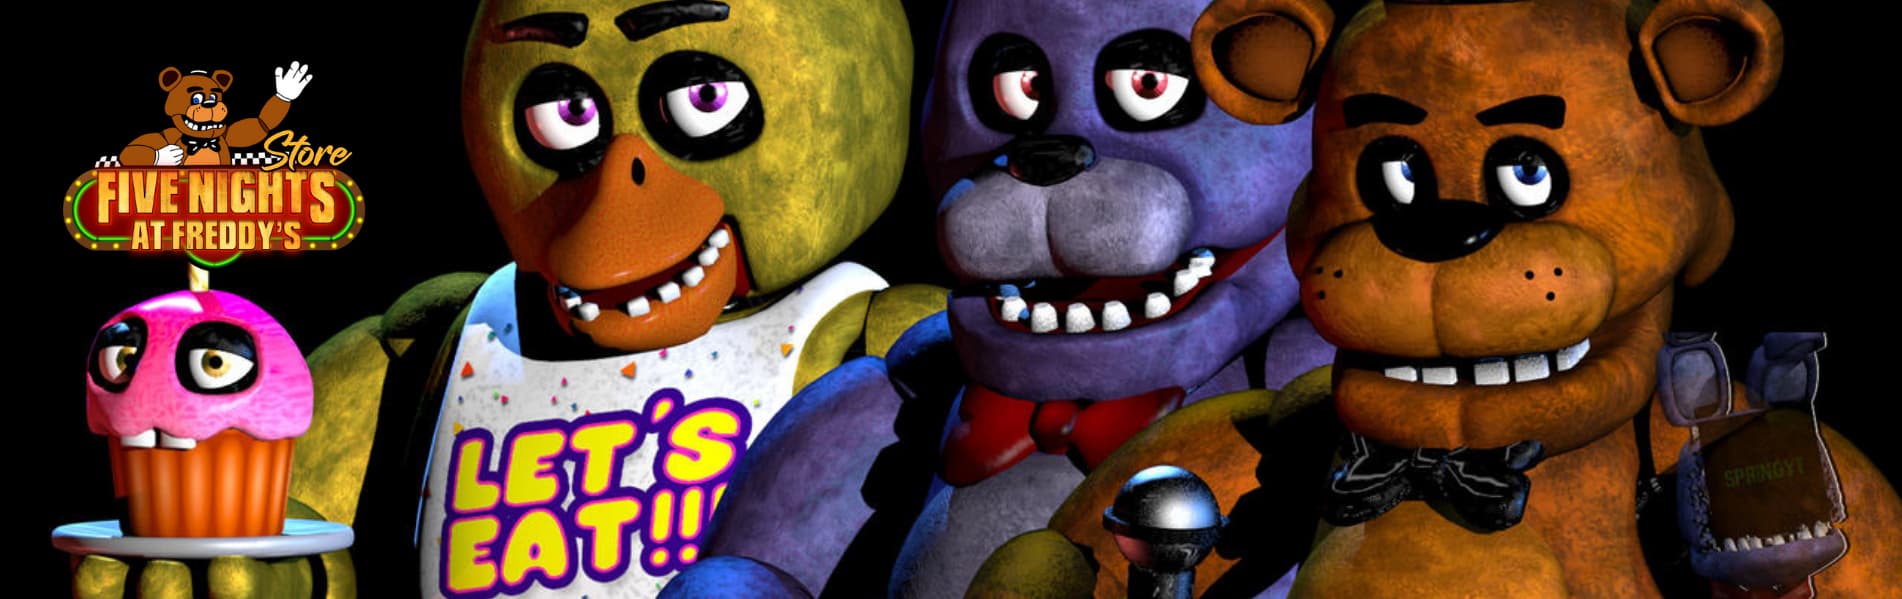 Five Nights at Freddy's Store Banner 2